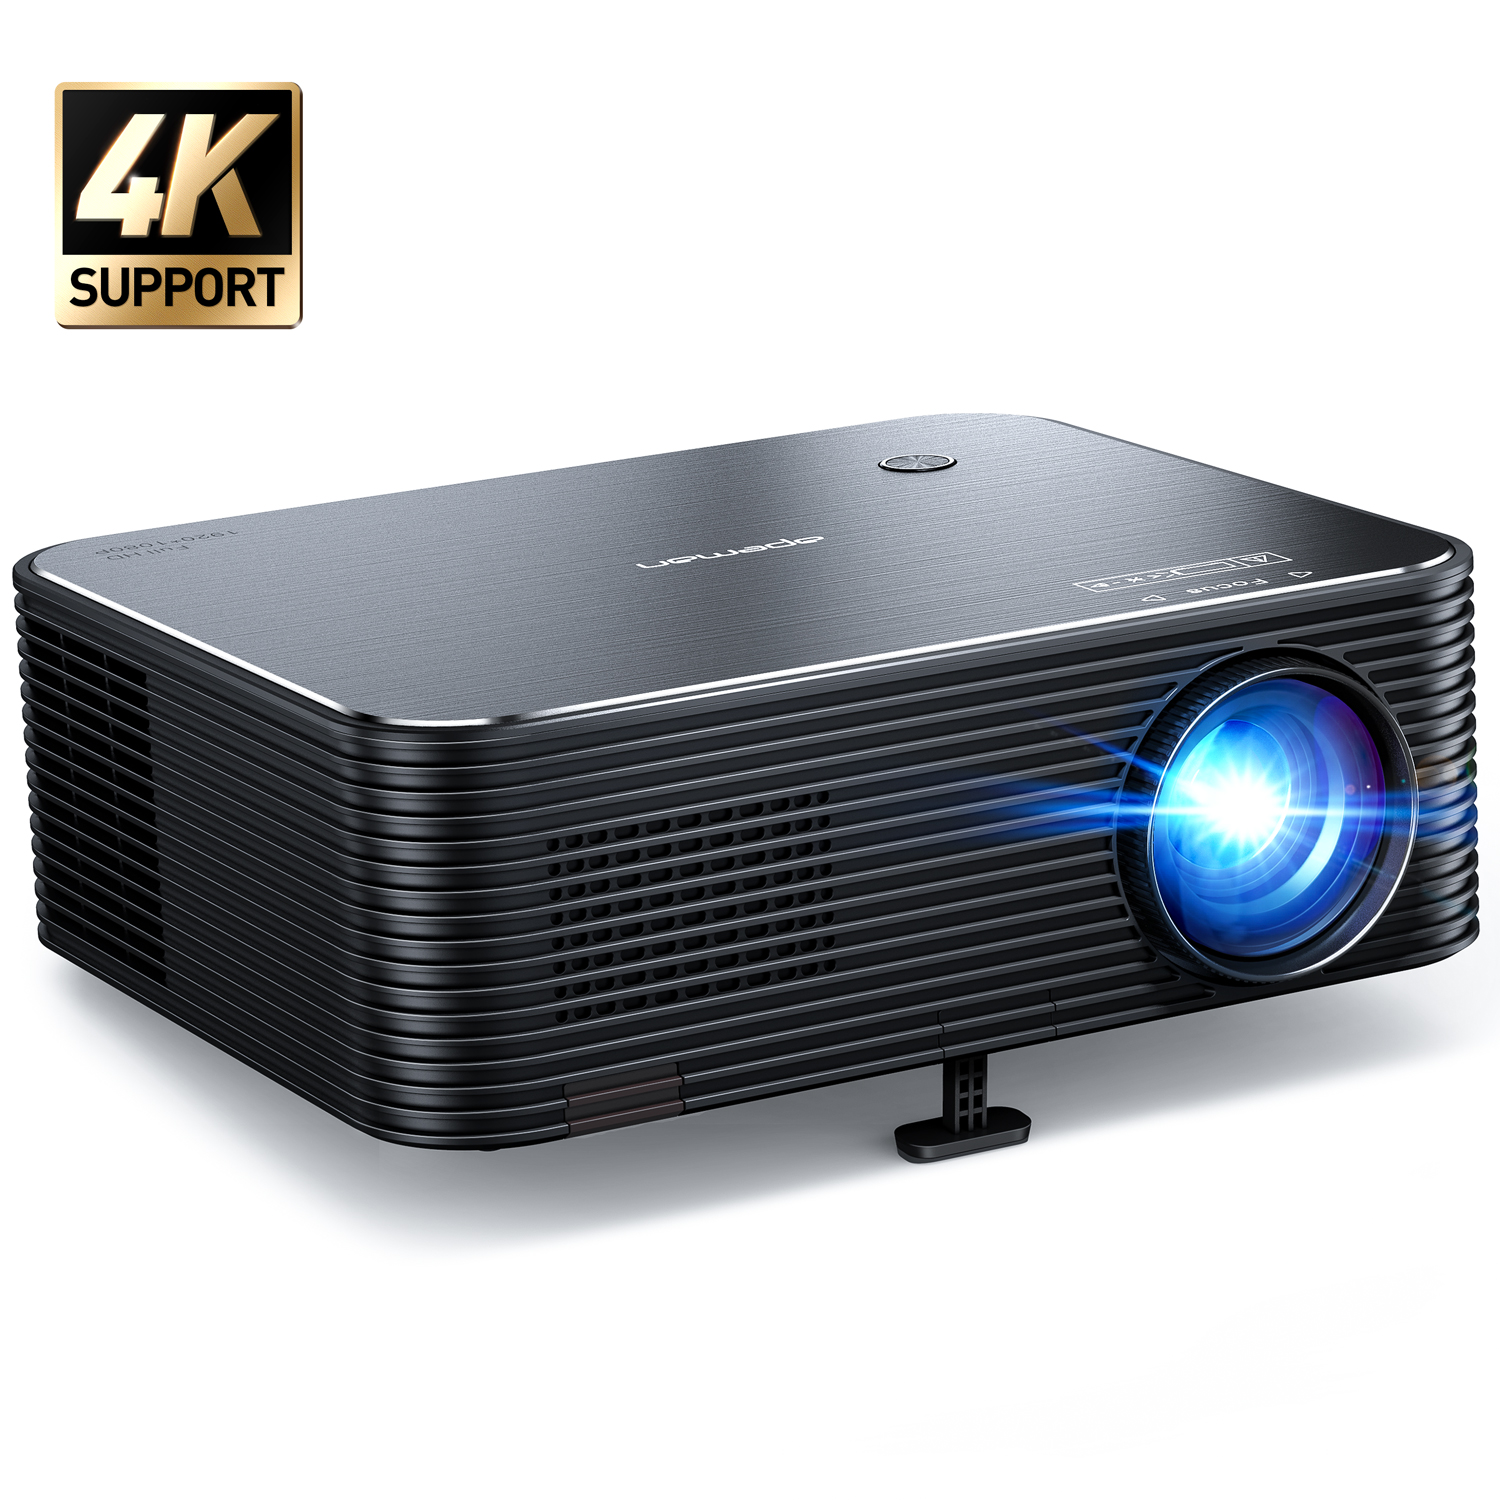 Apeman 4K Projector,Native 1080P,up to 300" Large Screen 55,000 Hours Lamp Life,Black - image 1 of 9